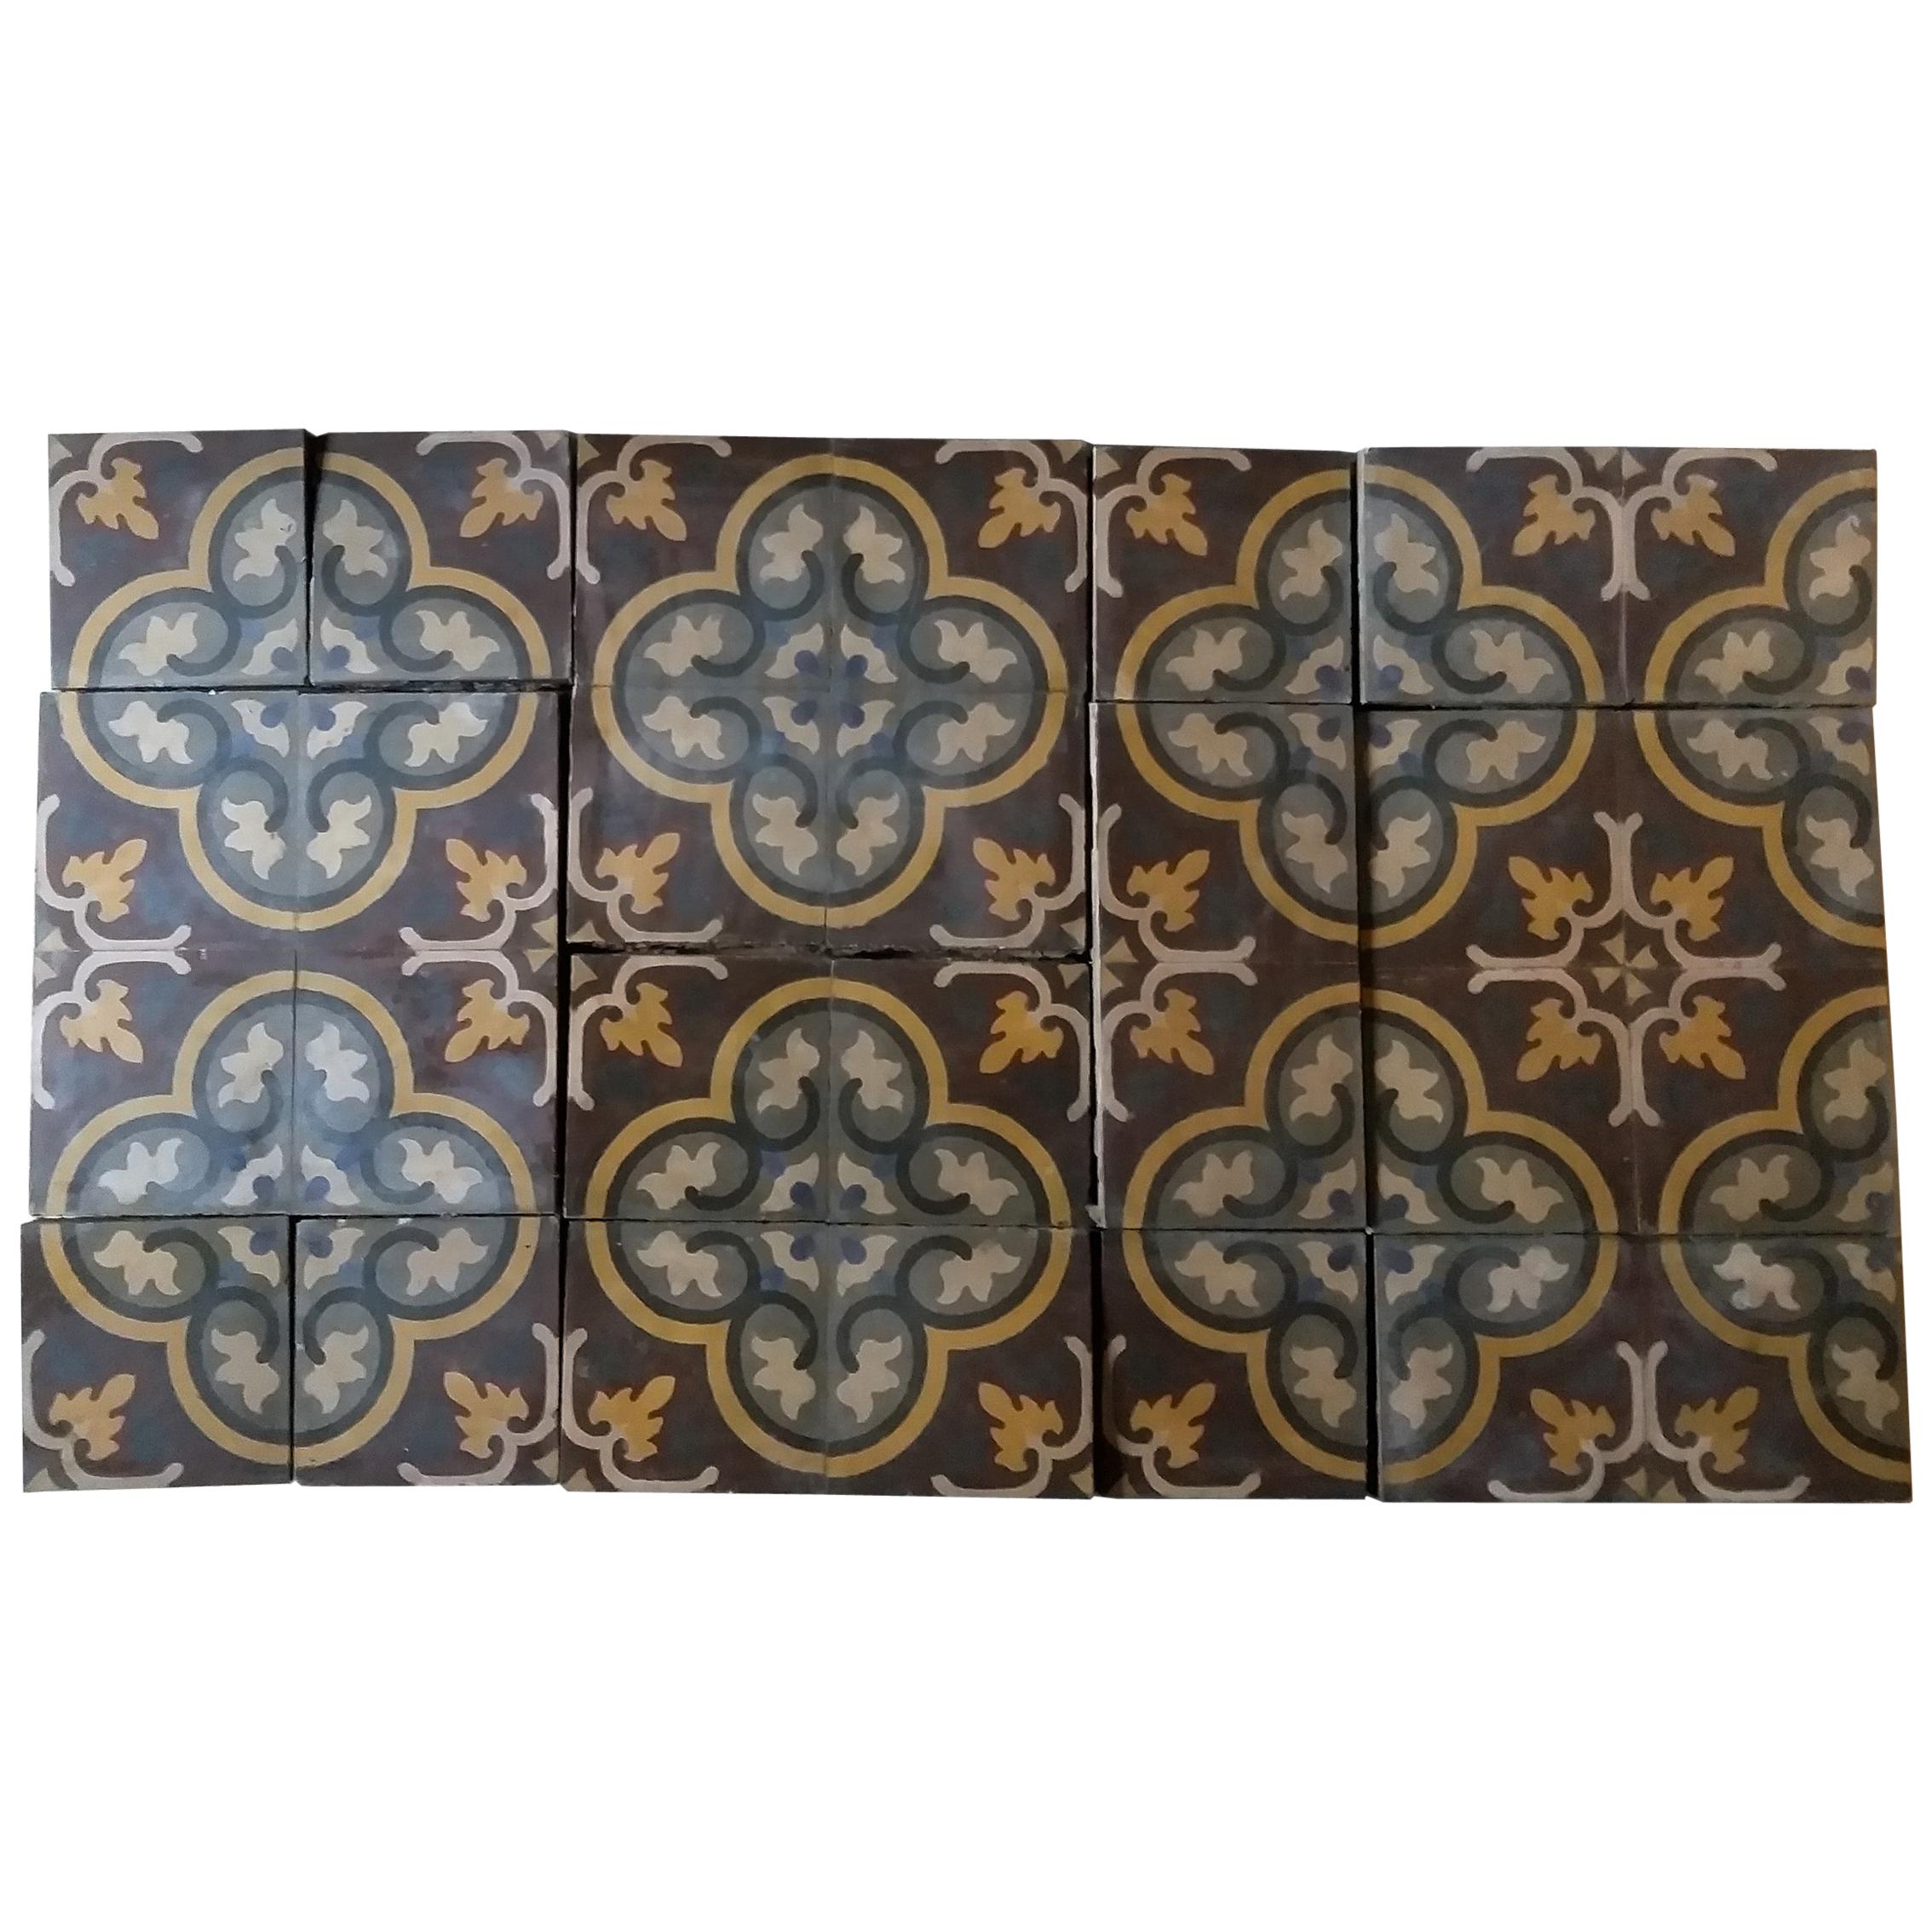 Floortiles, Reclaimed, Patterned, Period 1900 For Sale